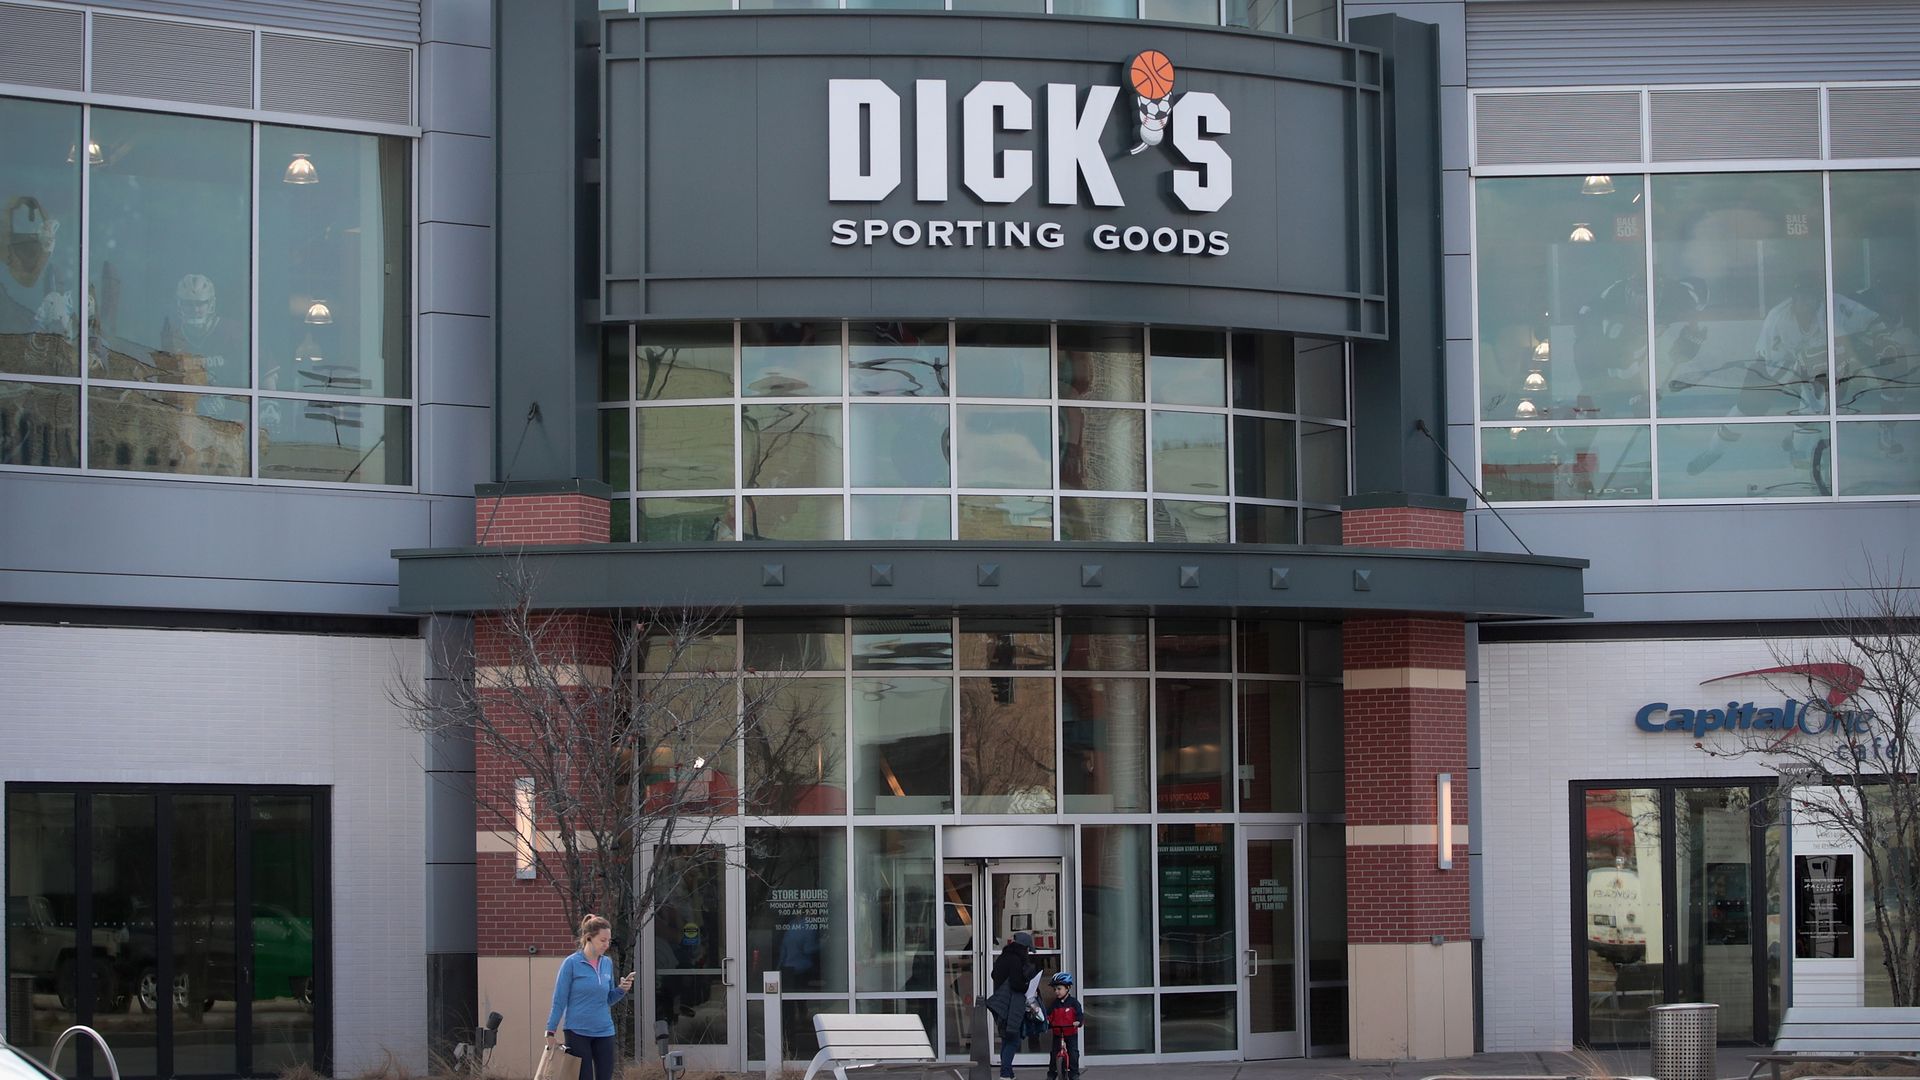 Dick's Sporting Goods storefront.